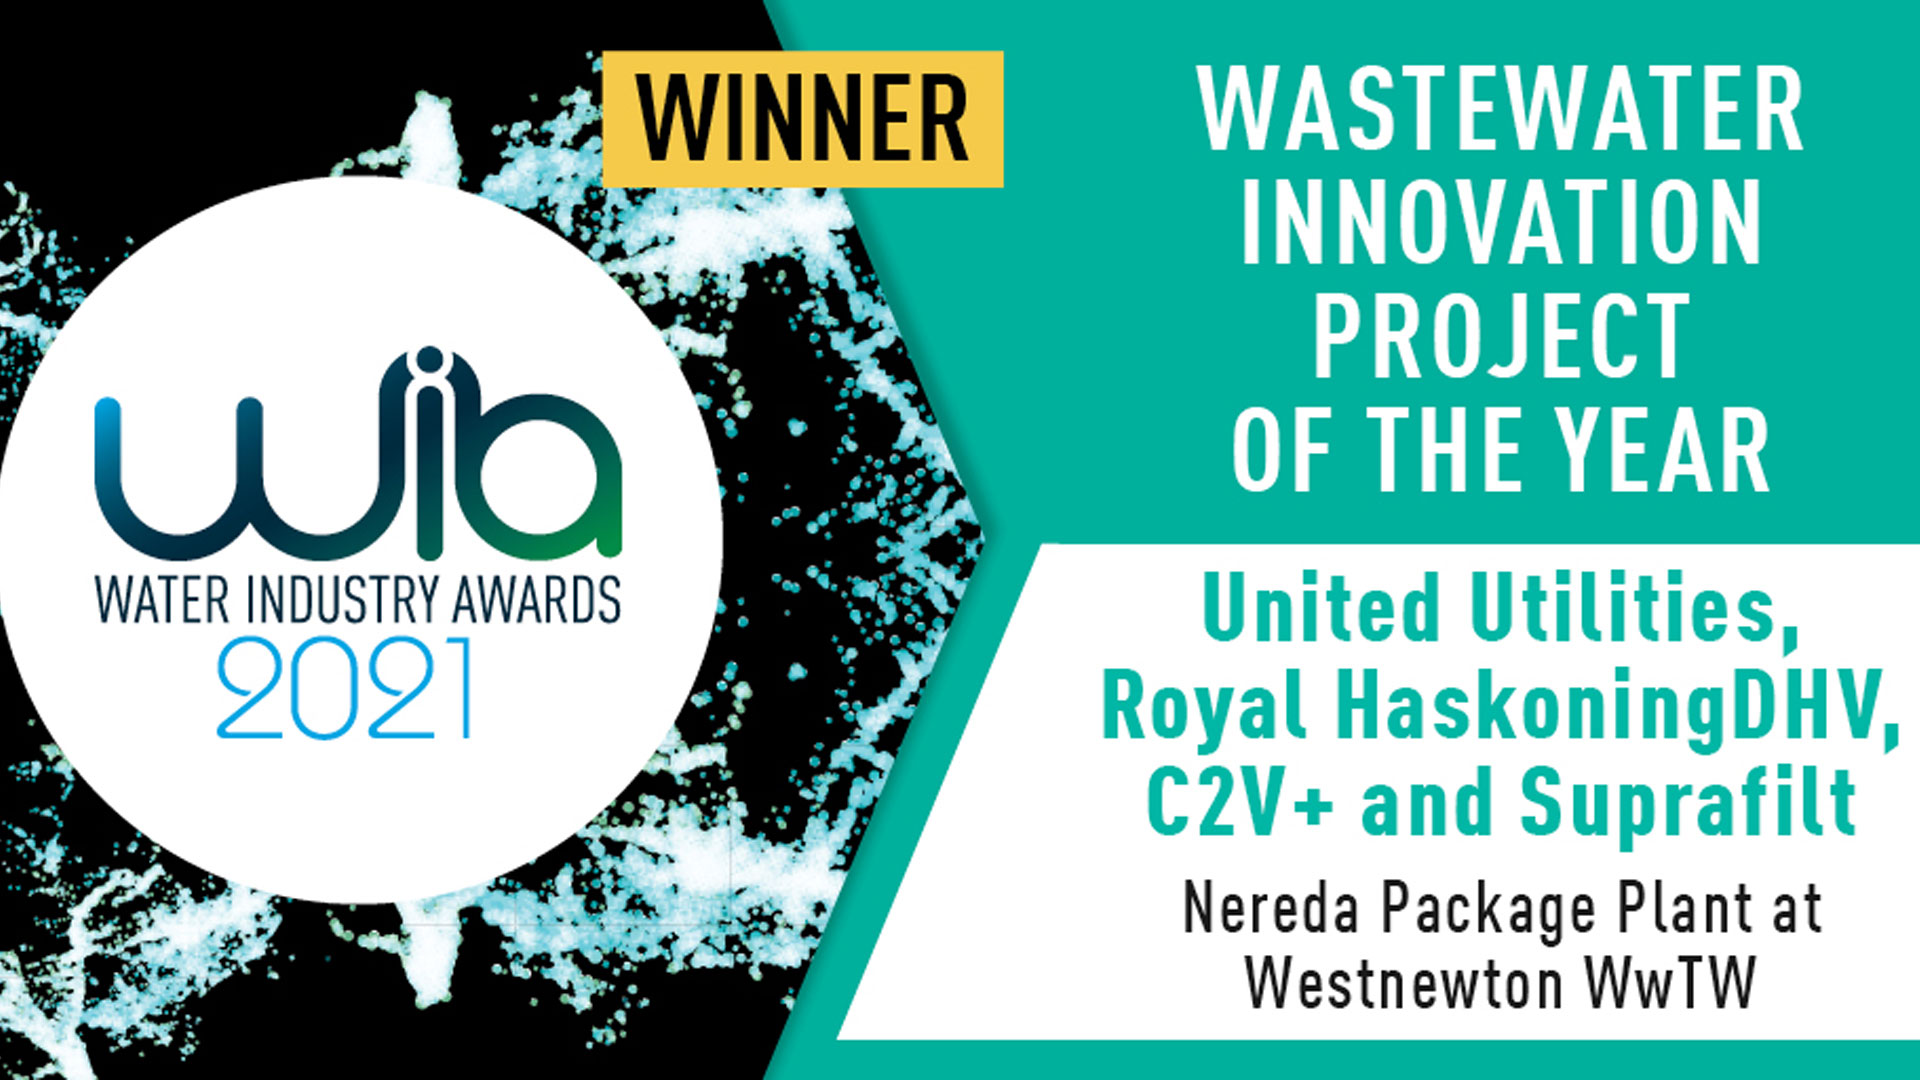 First Nereda package plant wins UK Water Industry Award Wastewater Innovation project of the year | Royal HaskoningDHV